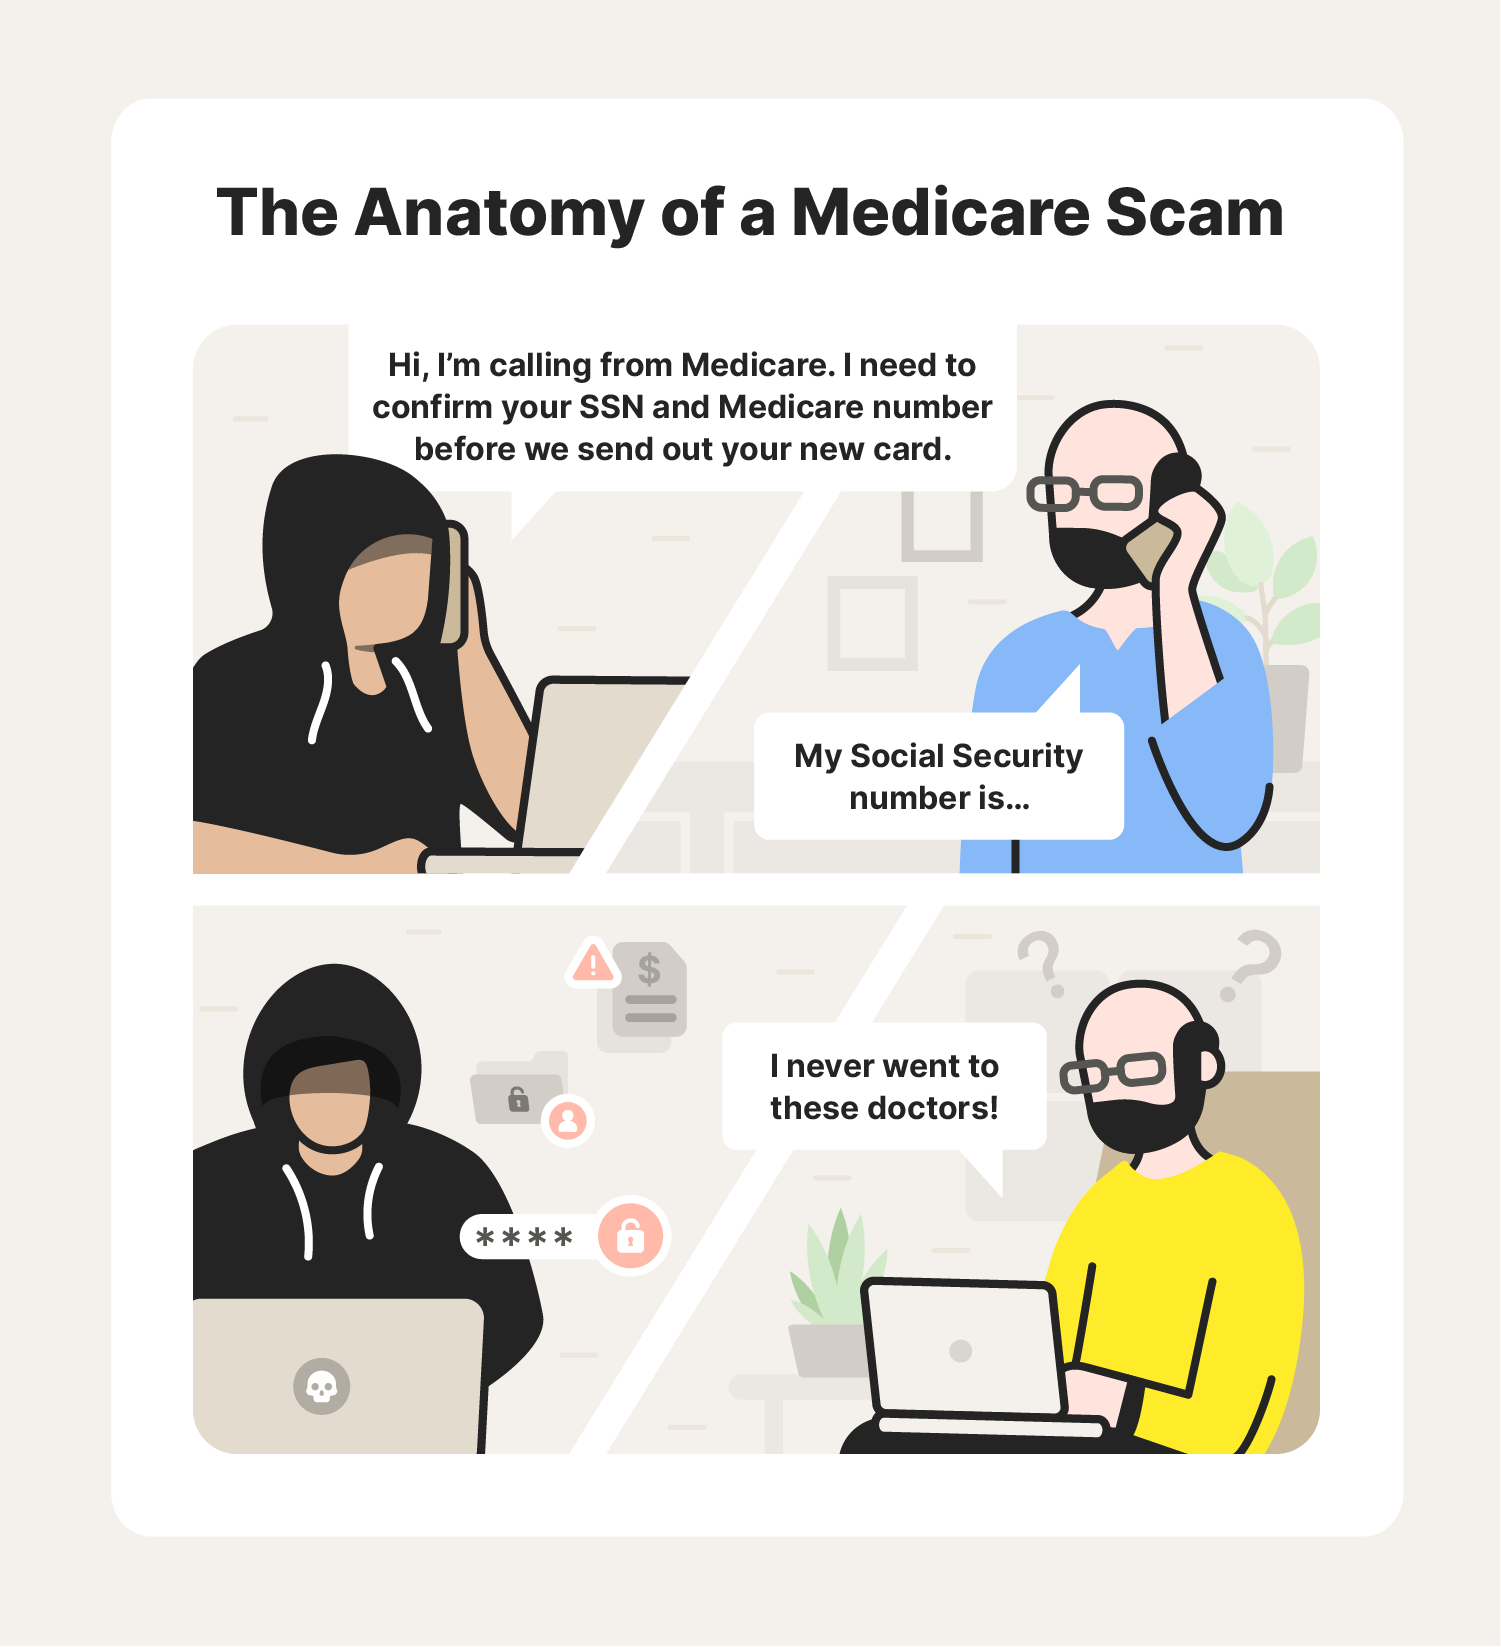 A comic strip features illustrations of a Medicare scam.